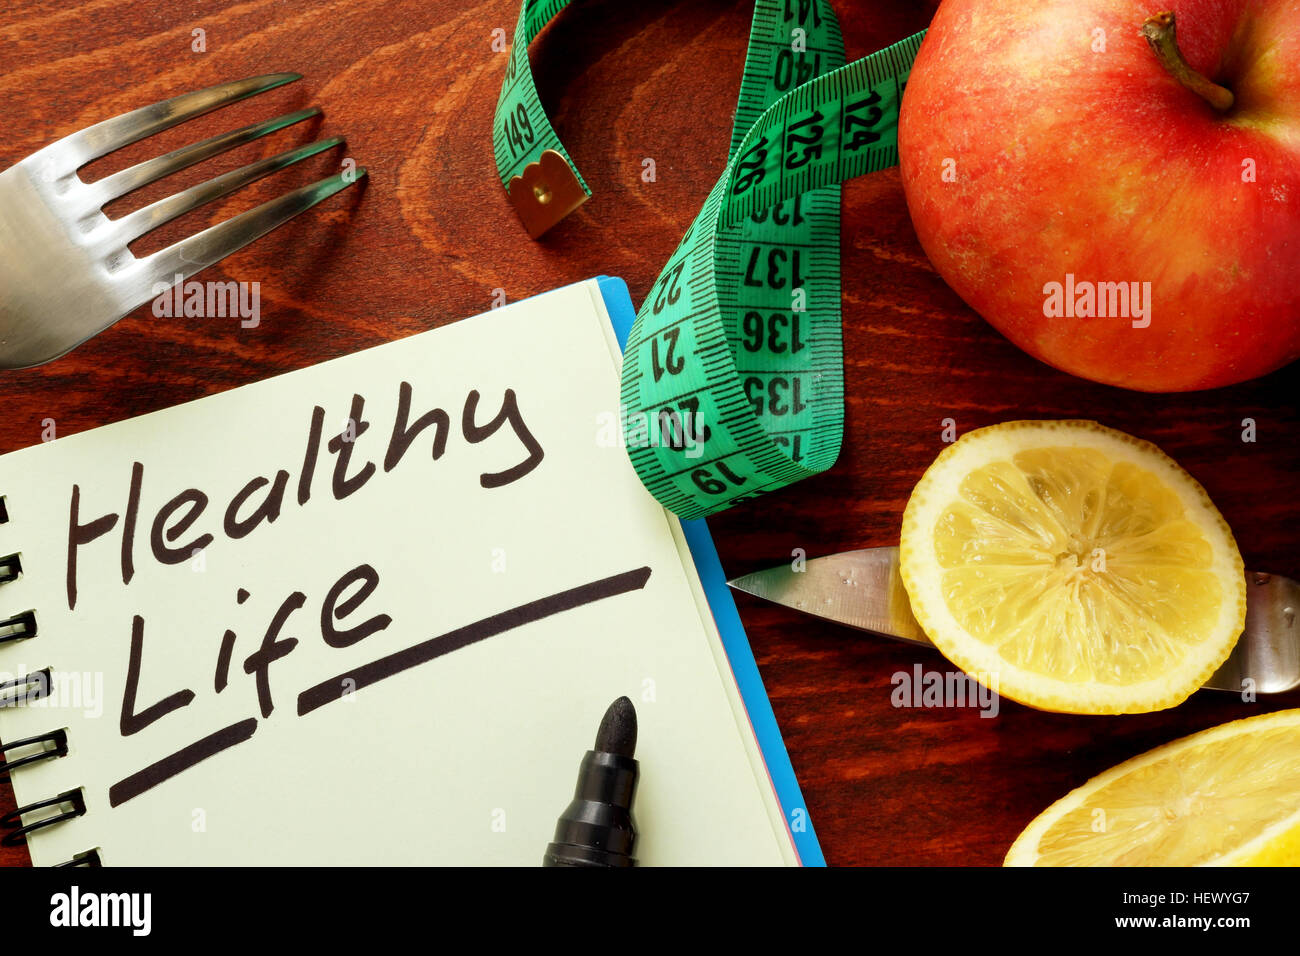 Healthy Life written in a note.  Lifestyle concept. Stock Photo